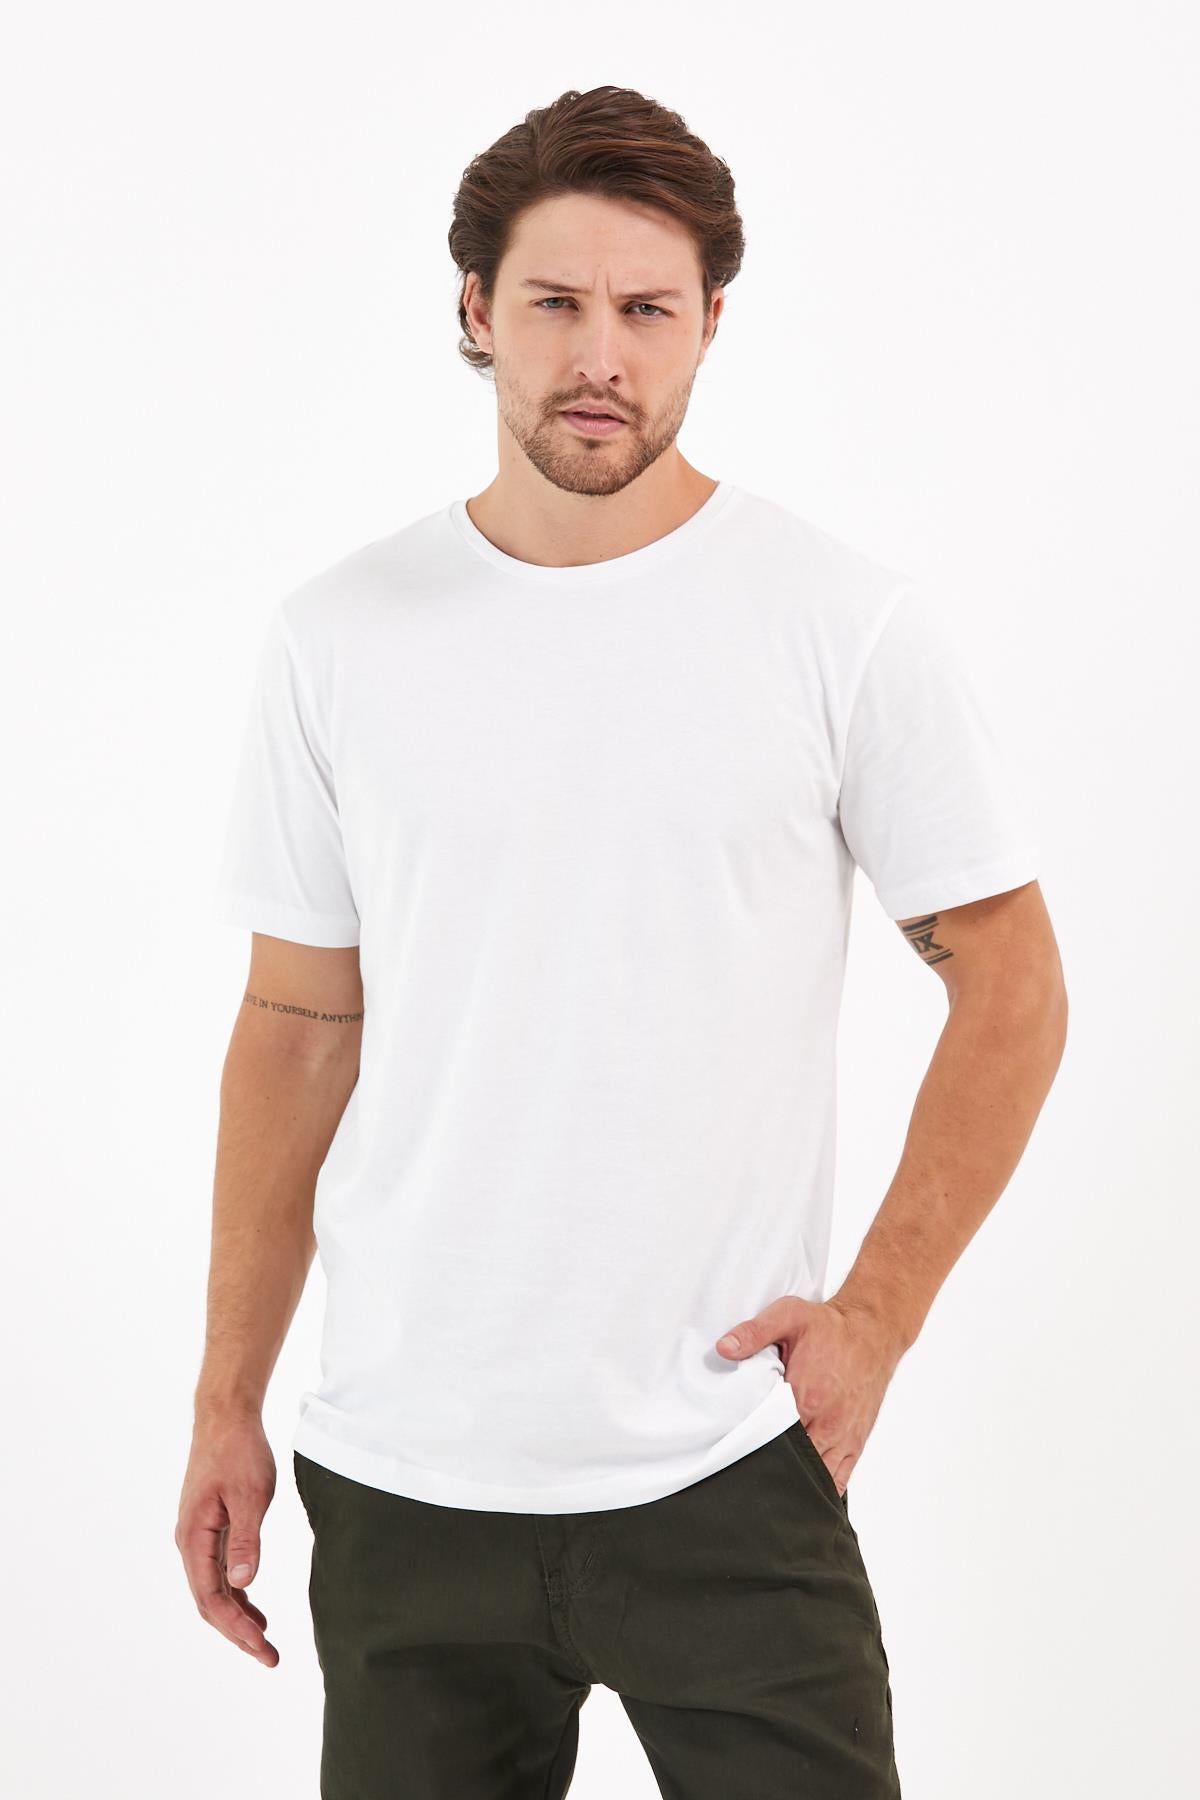 Canberra Back printed Crew Neck relaxed men